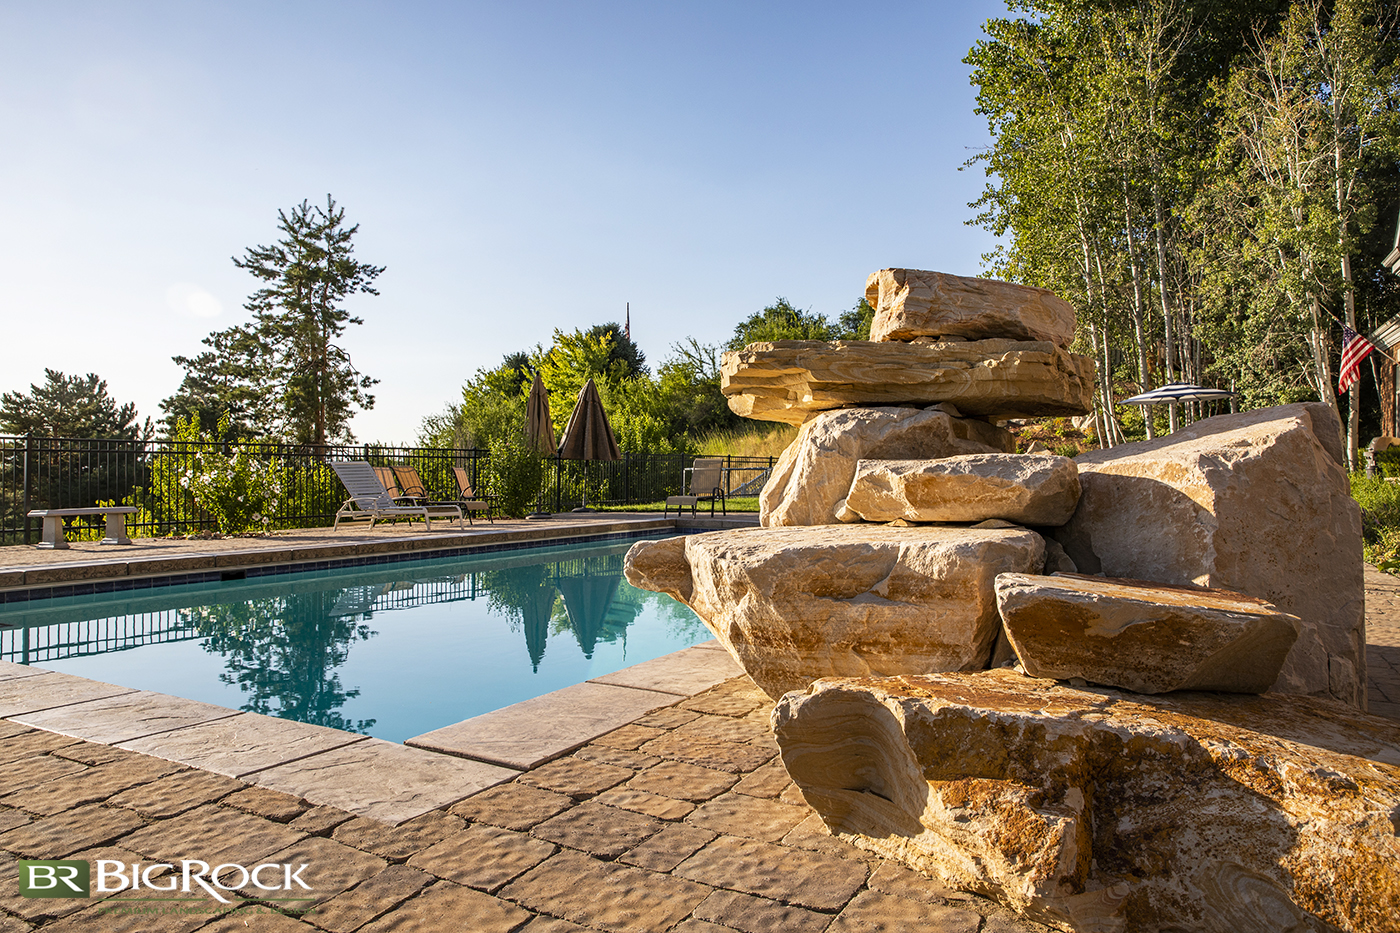 If you're looking for landscaping ideas for pool installation, look no further than premier landscaping Contractors Big Rock Landscaping. We can plan your entire landscaping project, design your landscape and install your pool.